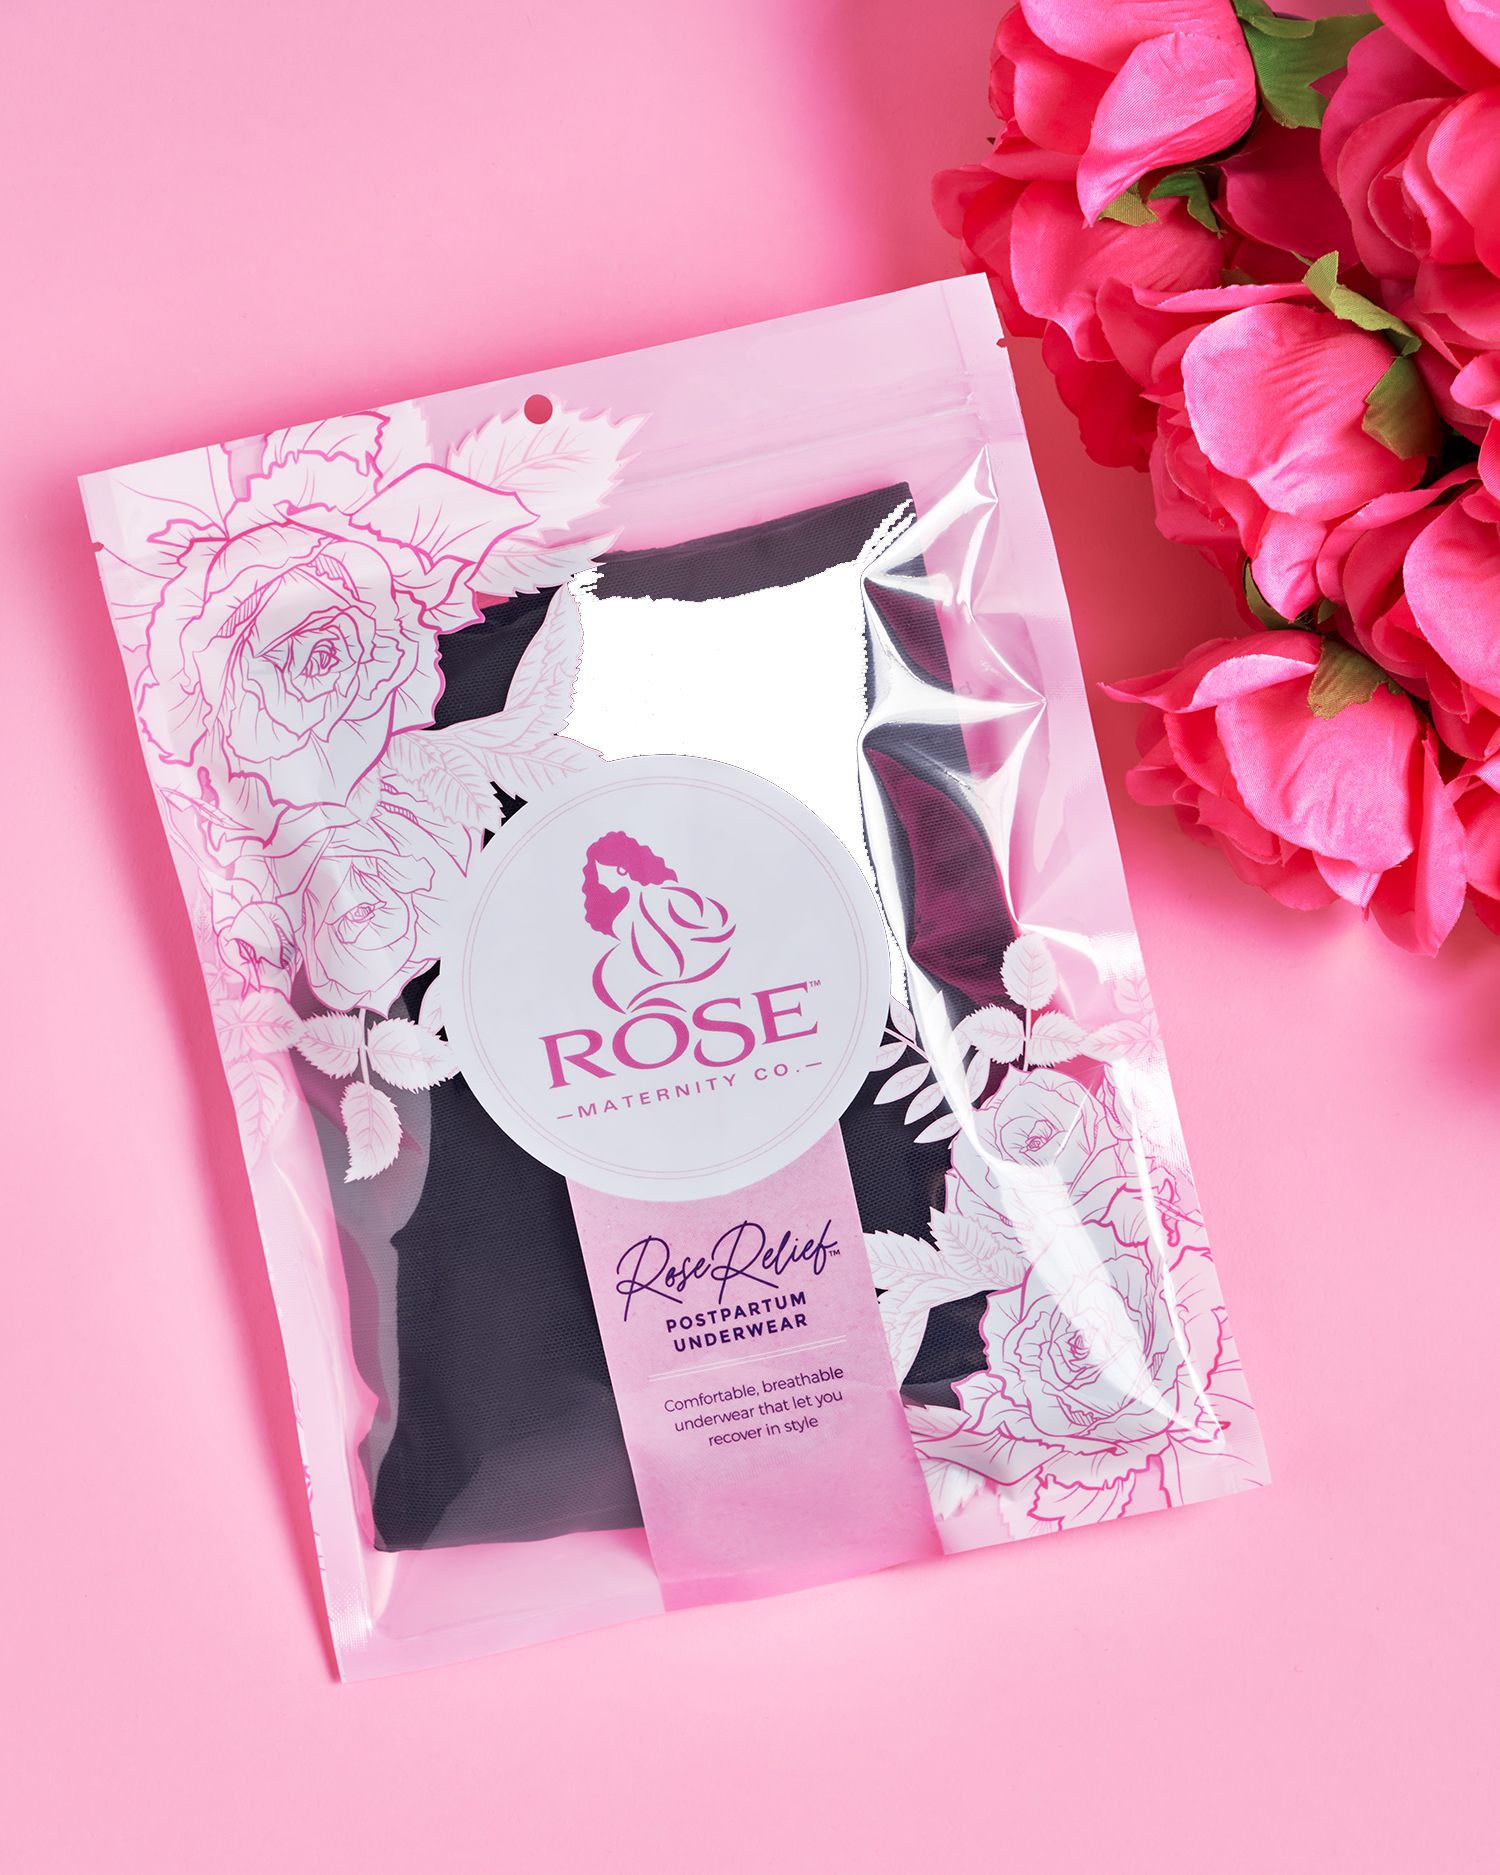 Rose Maternity Co. product packaging design